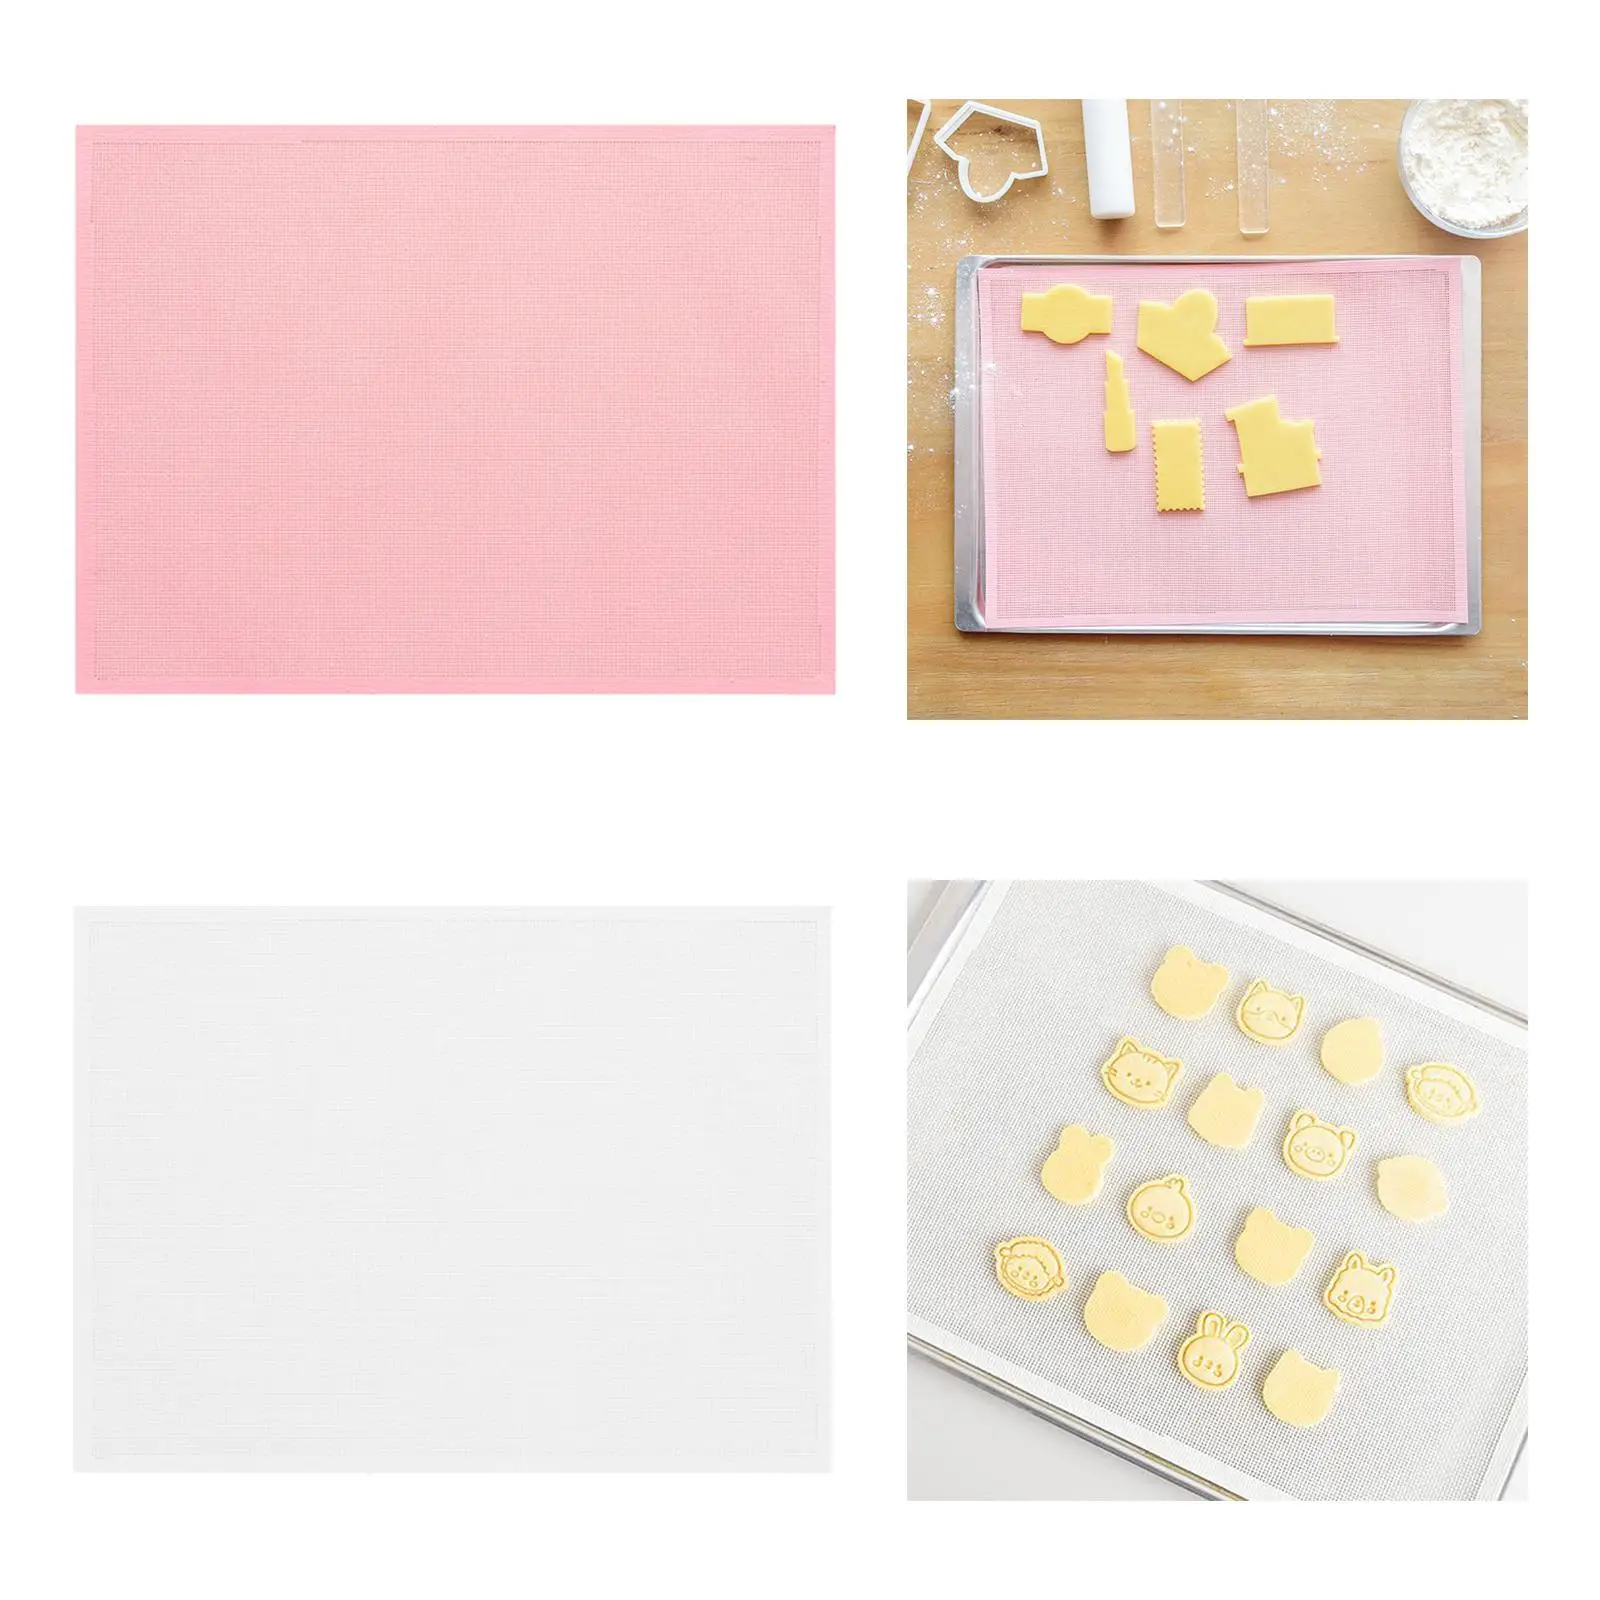 Kitchen Silicone Baking Mat Rolling Counter Mat Fondant/Pie Crust Pad Cushion Washable Cooking Bakeware Mat for Camping Picnic